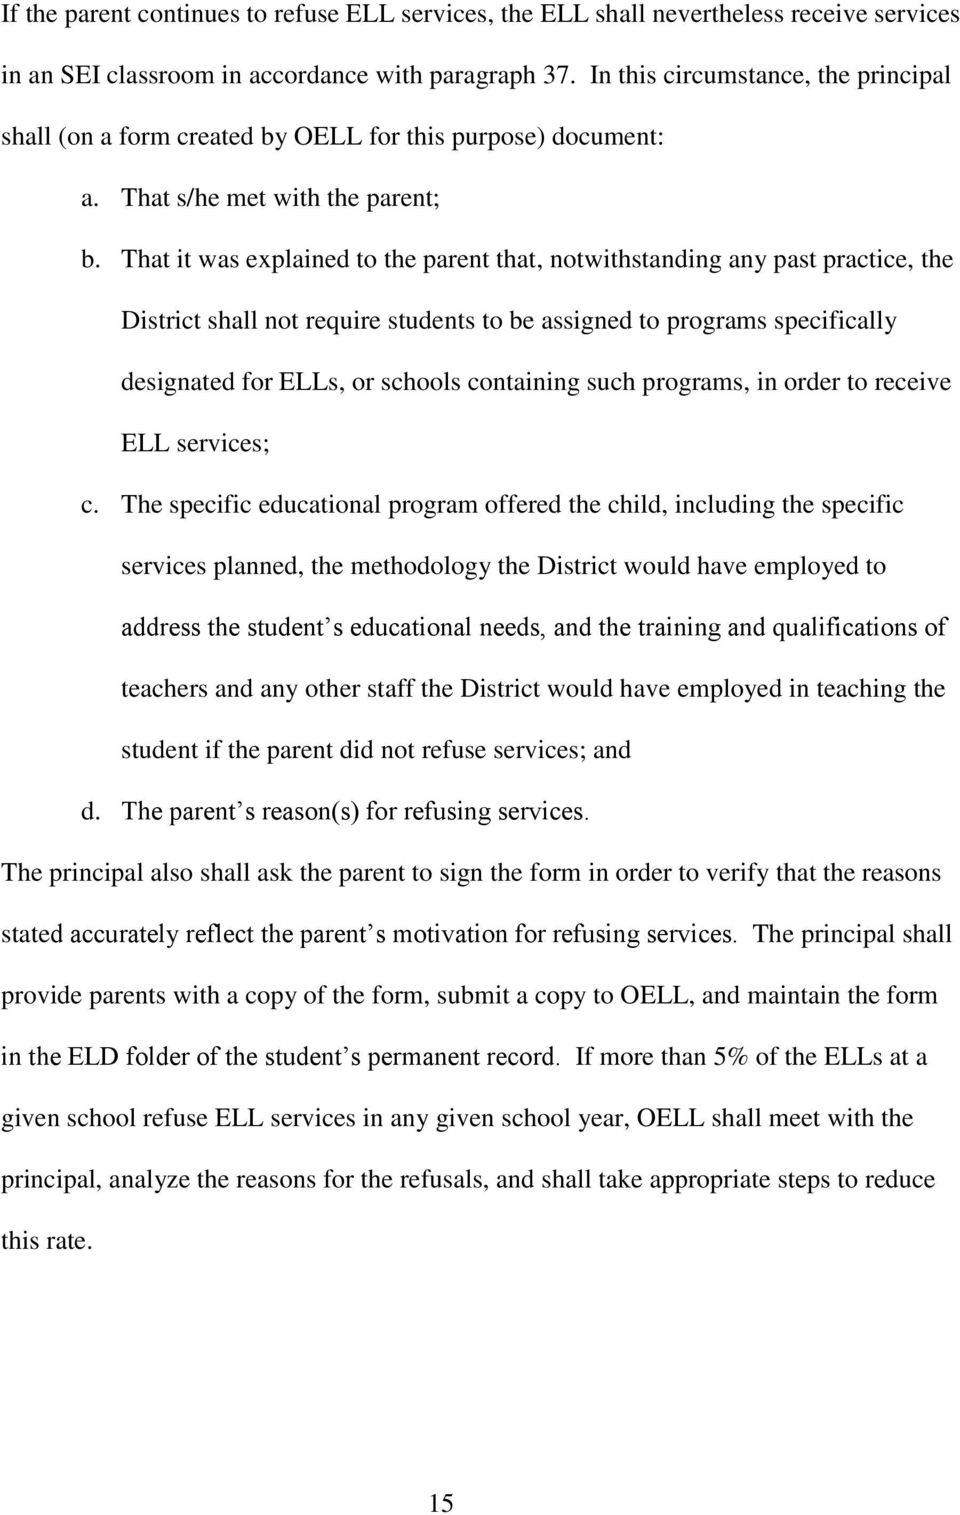 That it was explained to the parent that, notwithstanding any past practice, the District shall not require students to be assigned to programs specifically designated for ELLs, or schools containing